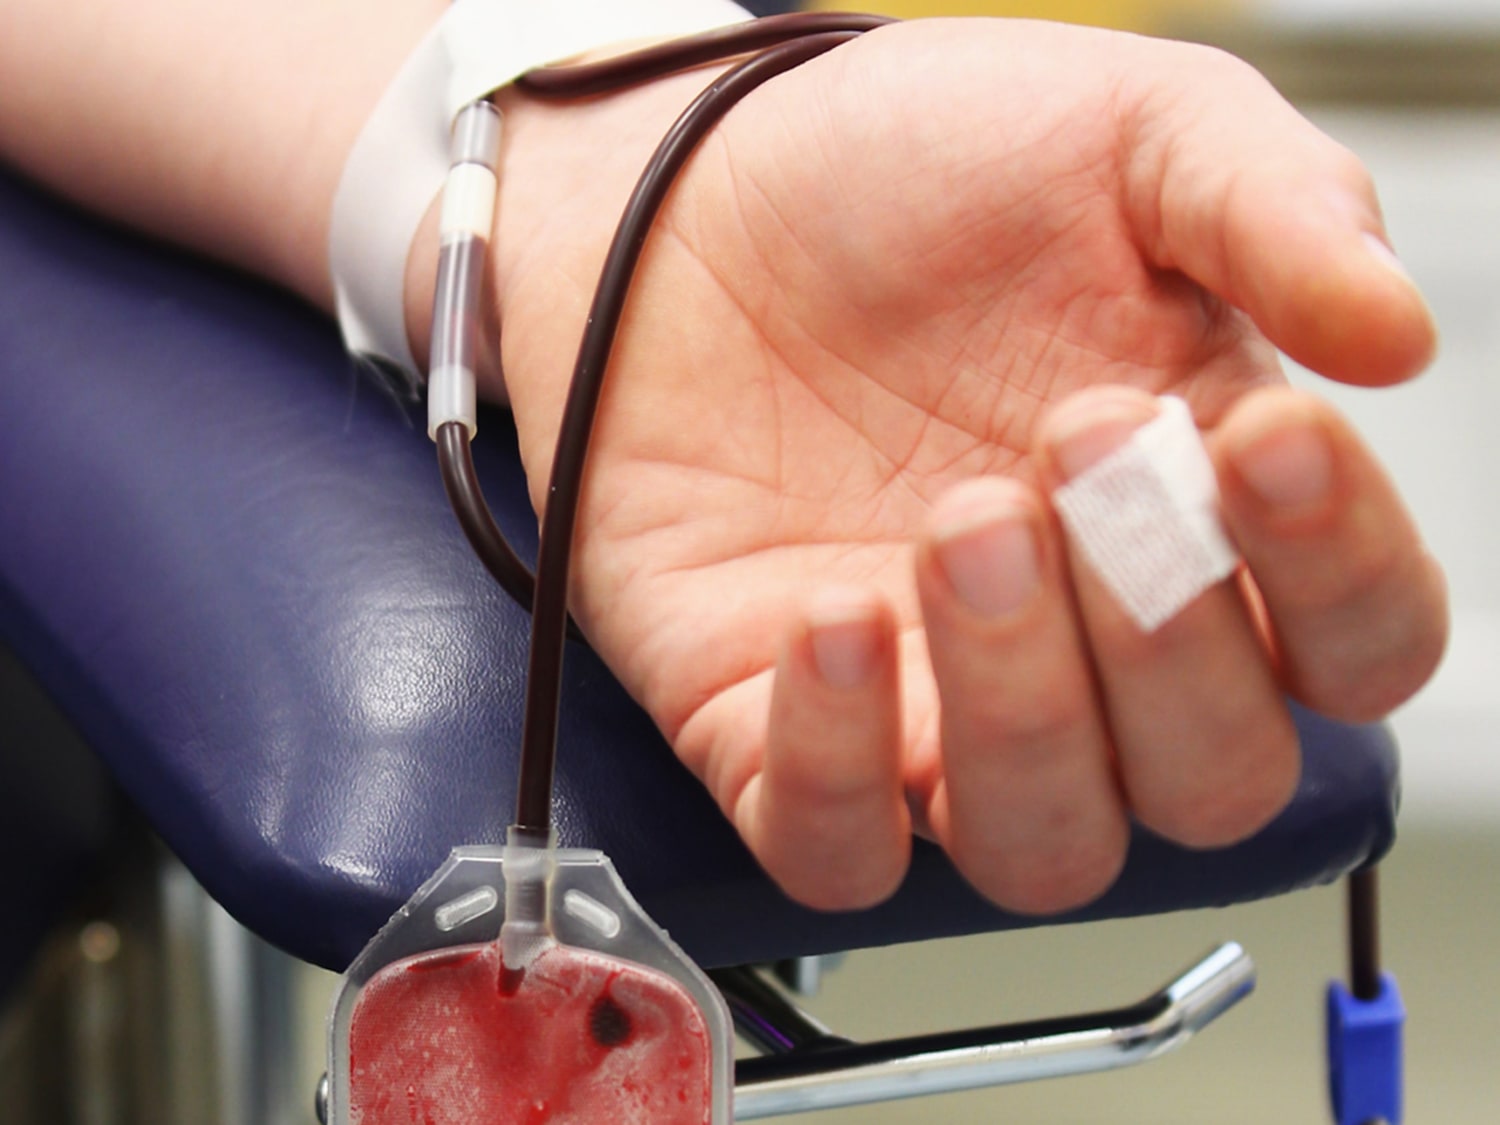 can gay men donate blood in the us